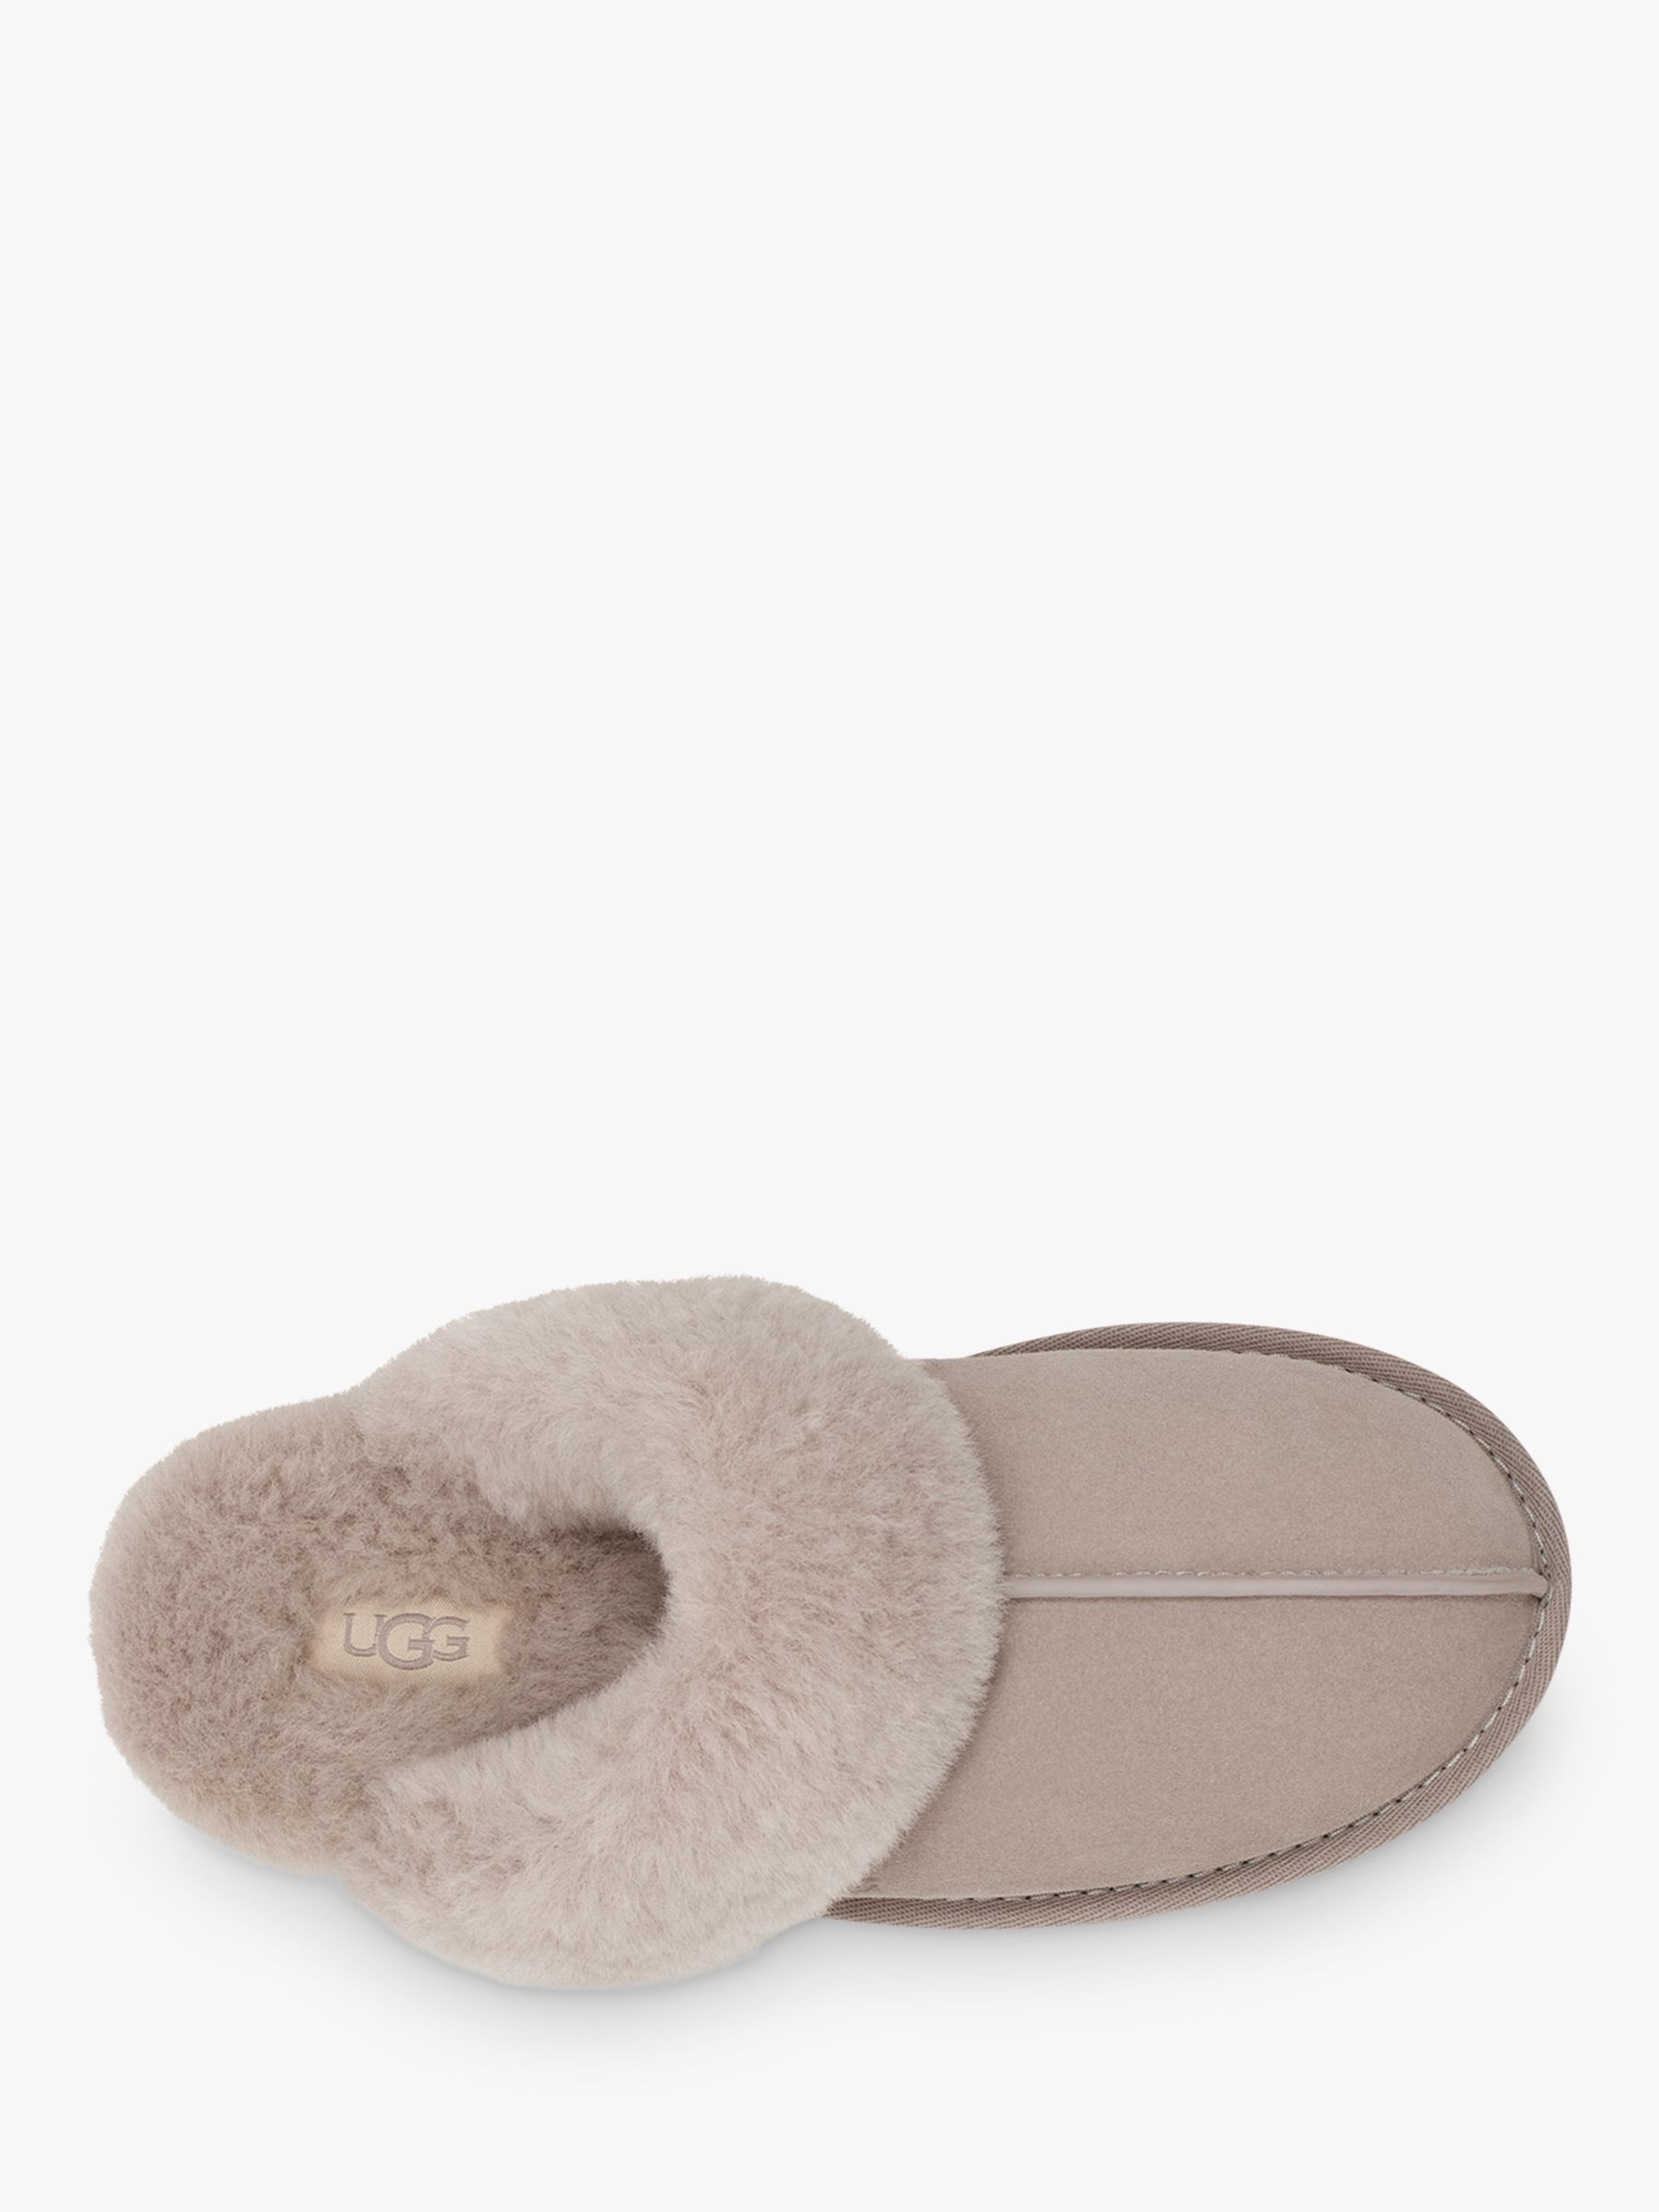 UGG Scuffette Sheepskin and Suede Slippers, Campfire at John Lewis ...